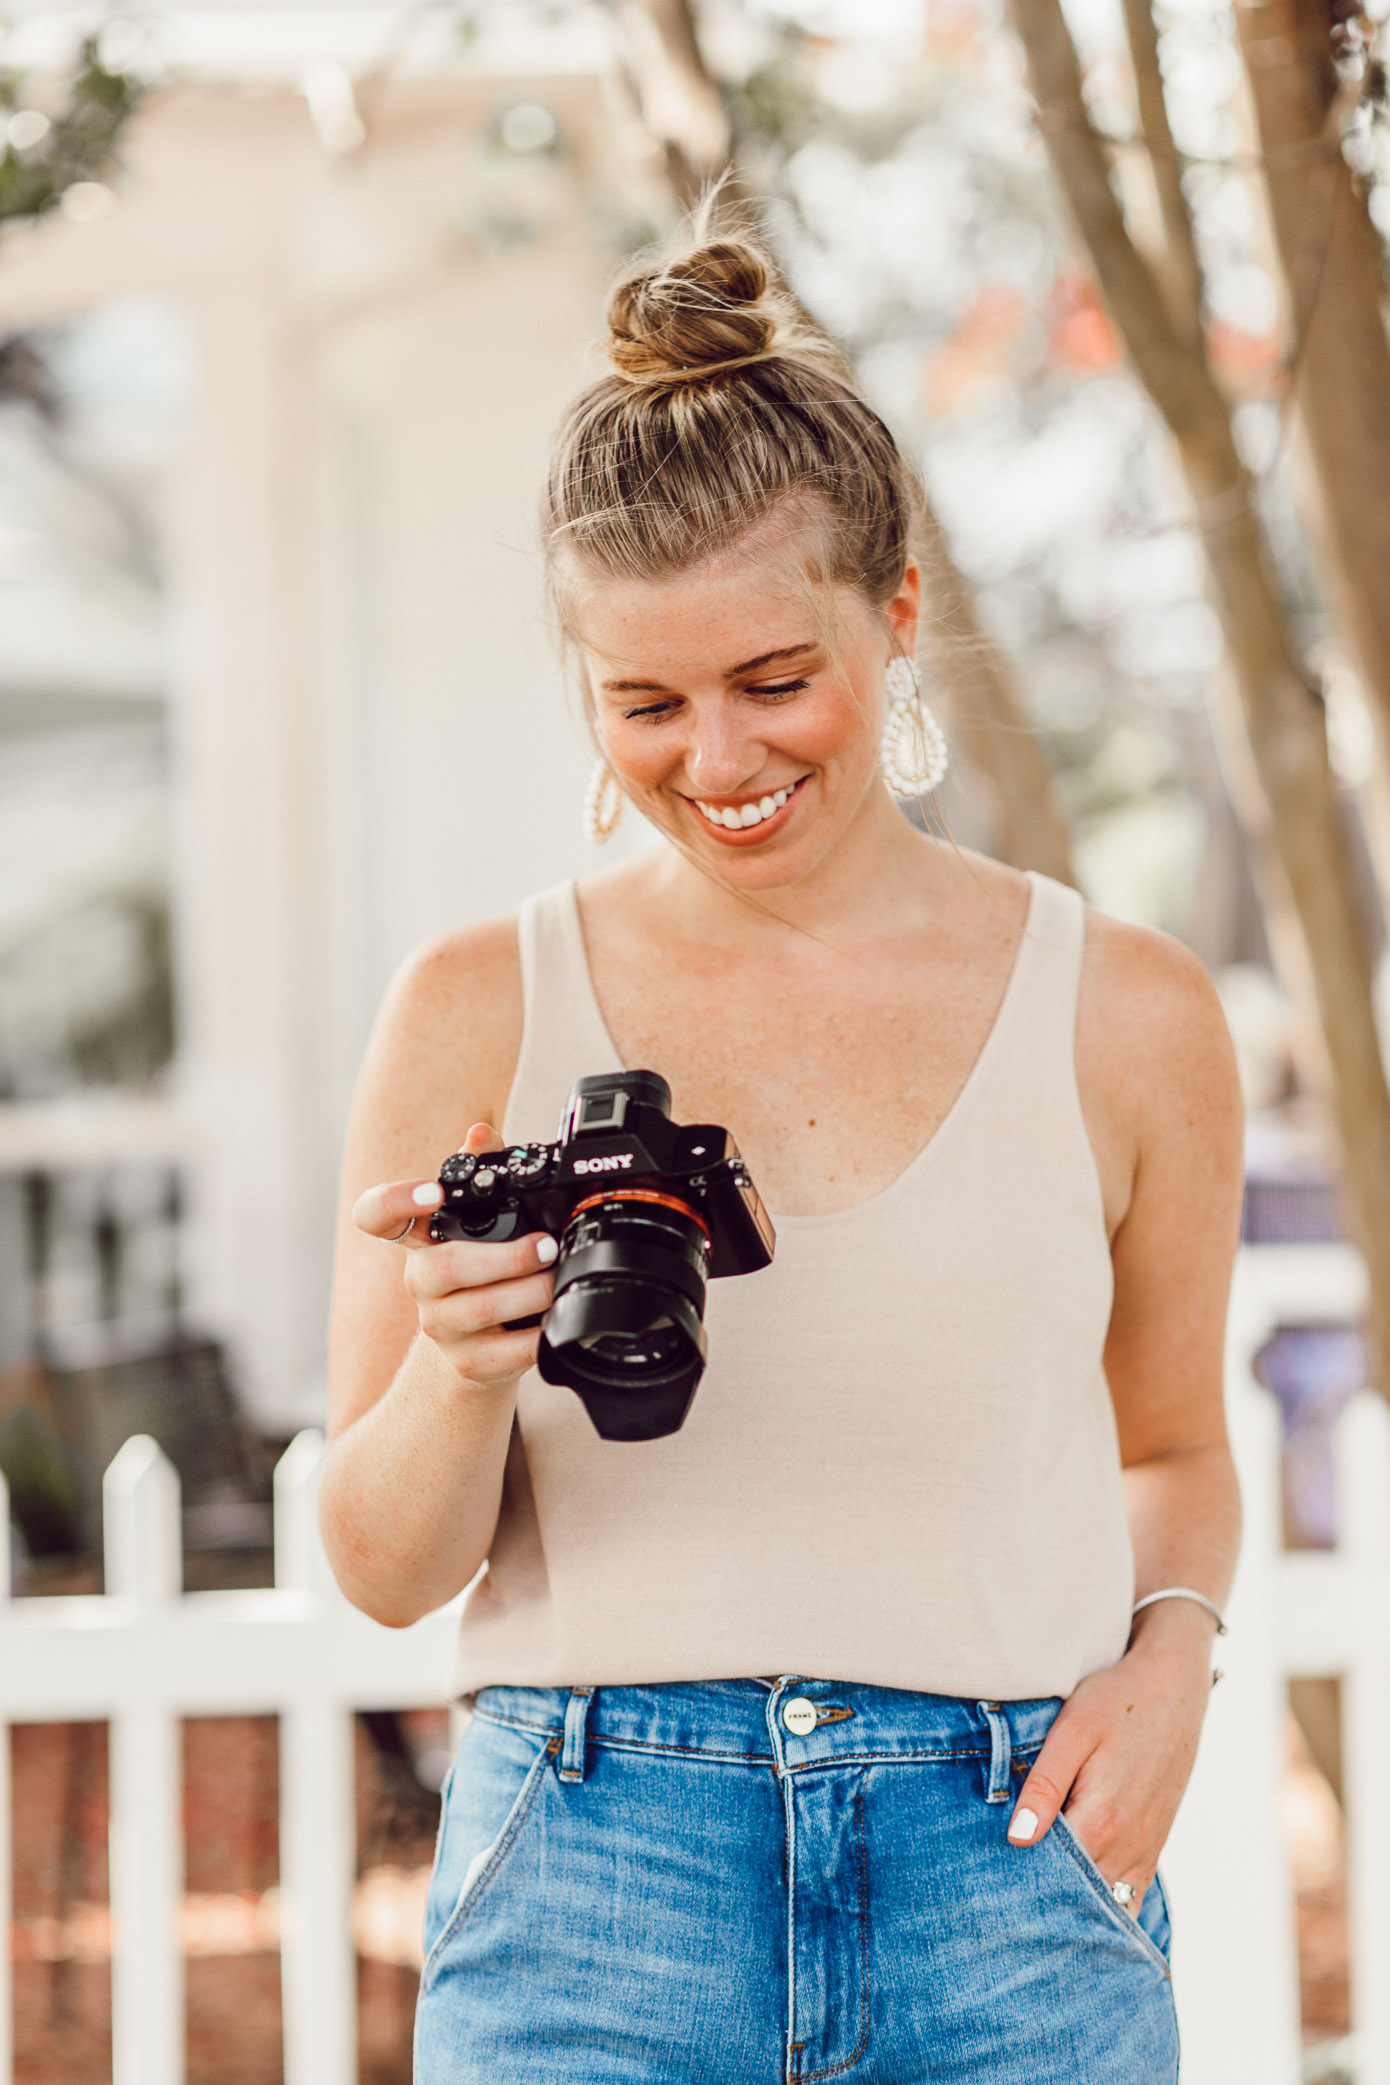 Blogger Photo Editing Tips | Photography Tips and Camera Recommendations for Bloggers featured on Louella Reese